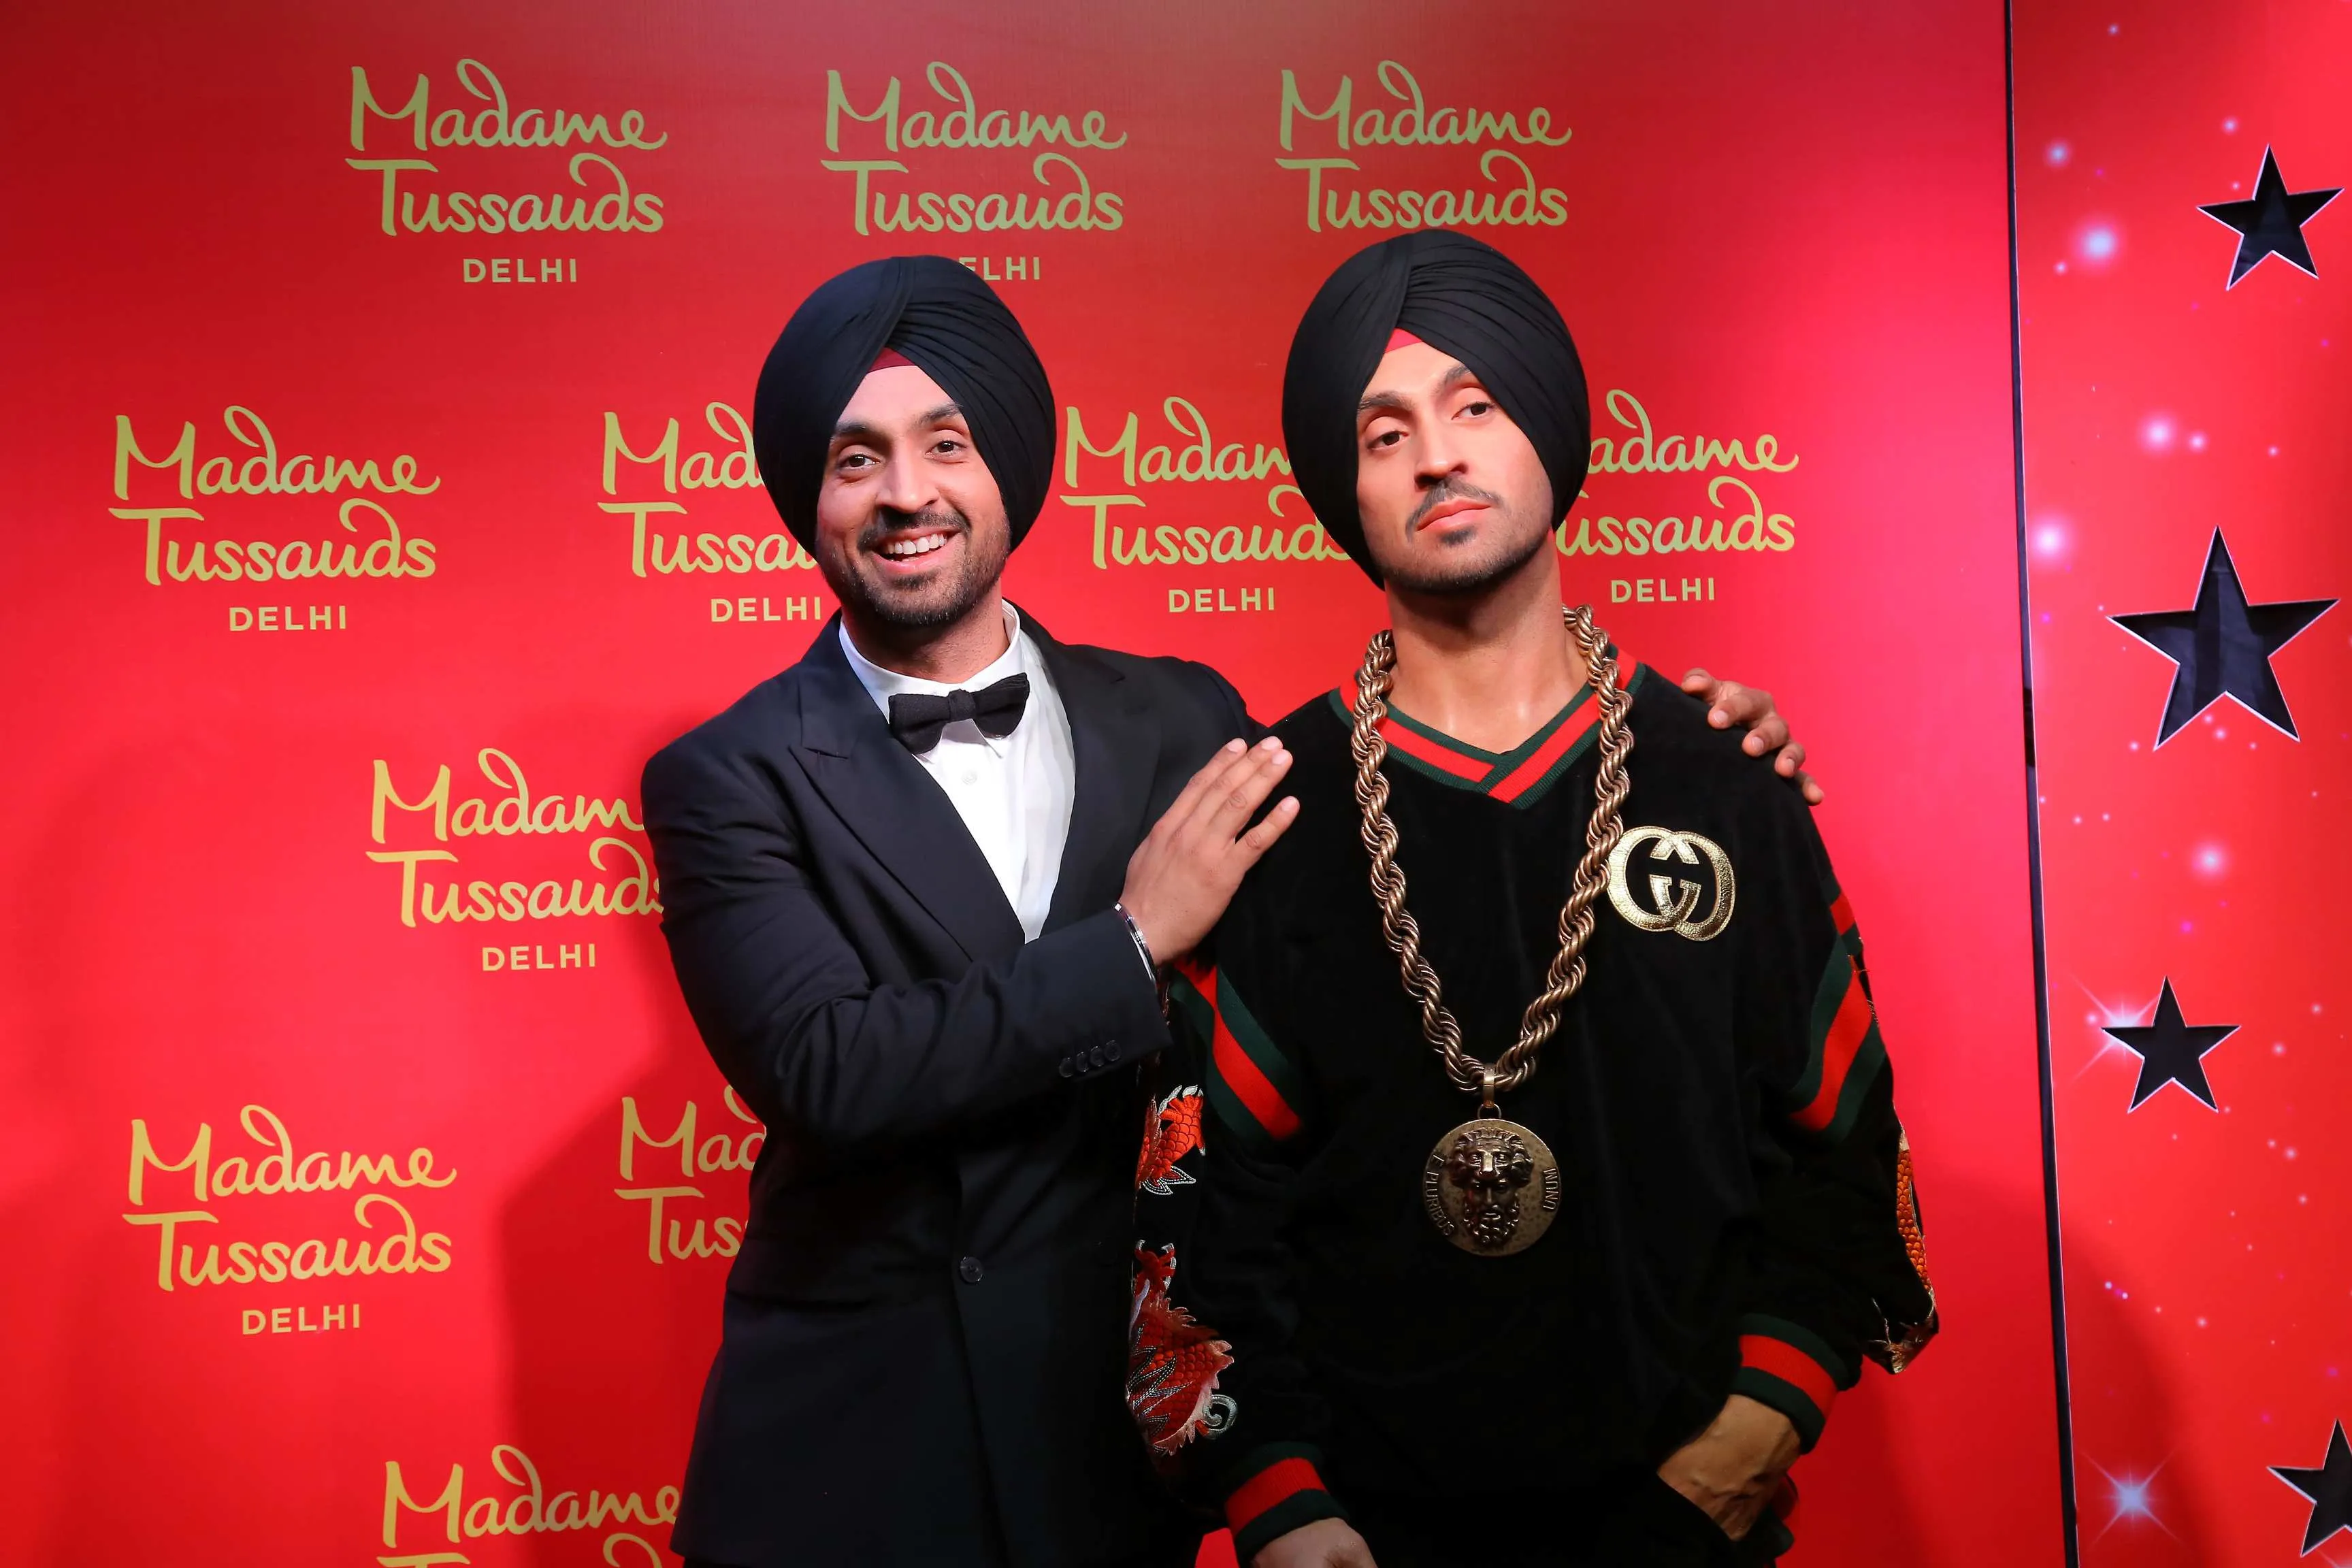 Diljit Dosanjh with his figure 